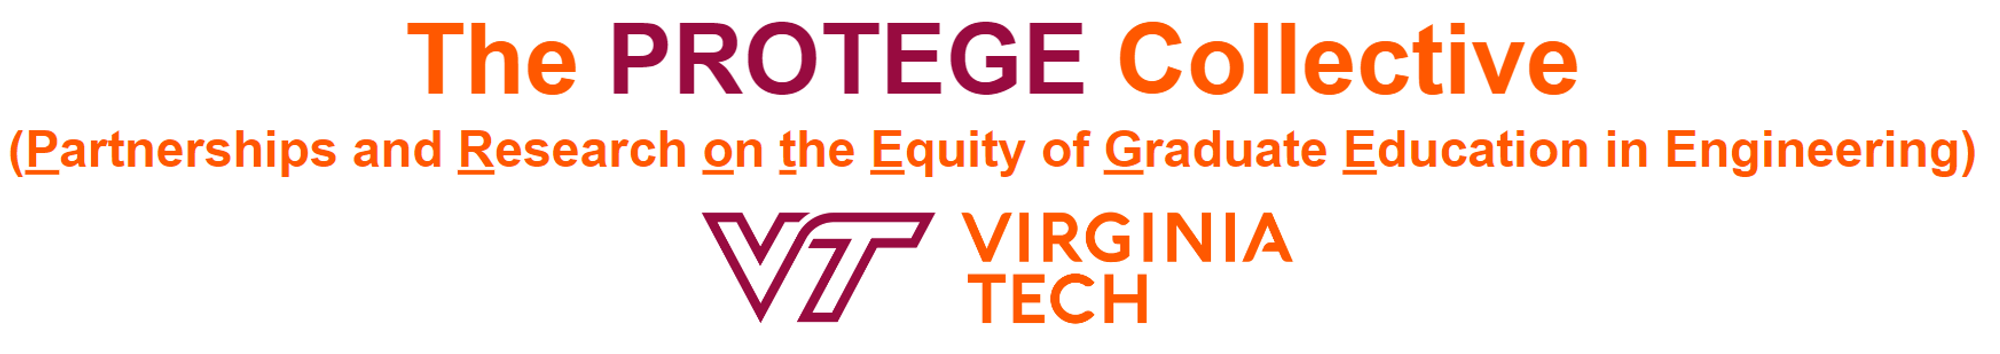 The PROTEGE Collective at Virginia Tech